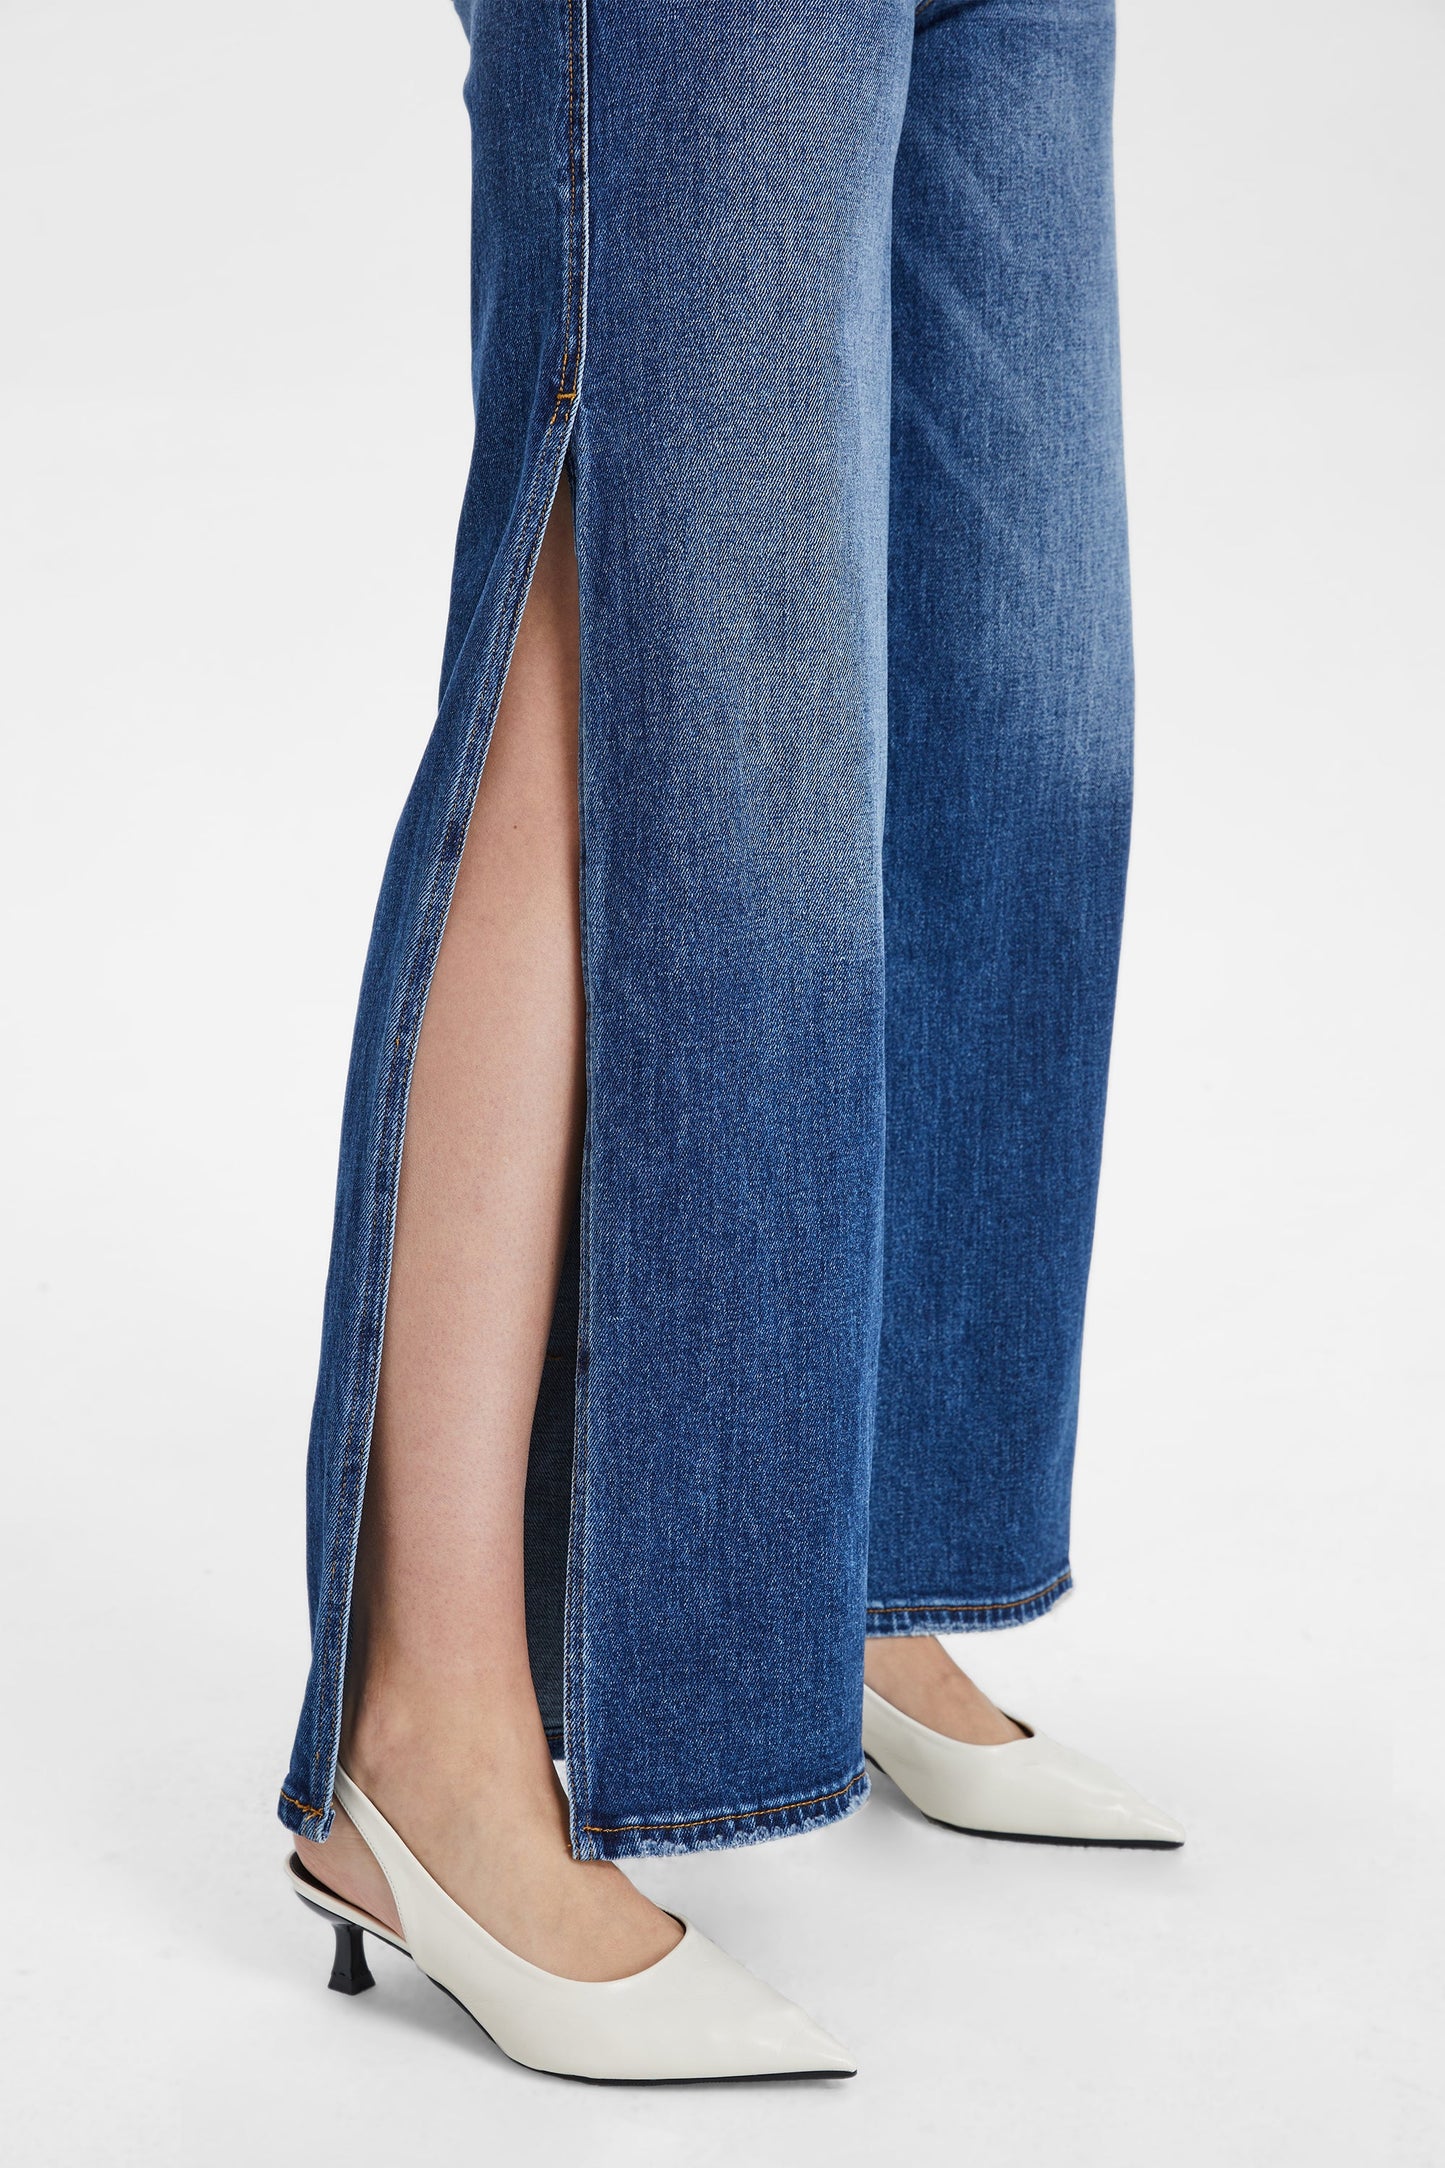 HIGH RISE WIDE LEG JEANS WITH SLIT BYW8037 LOVELY